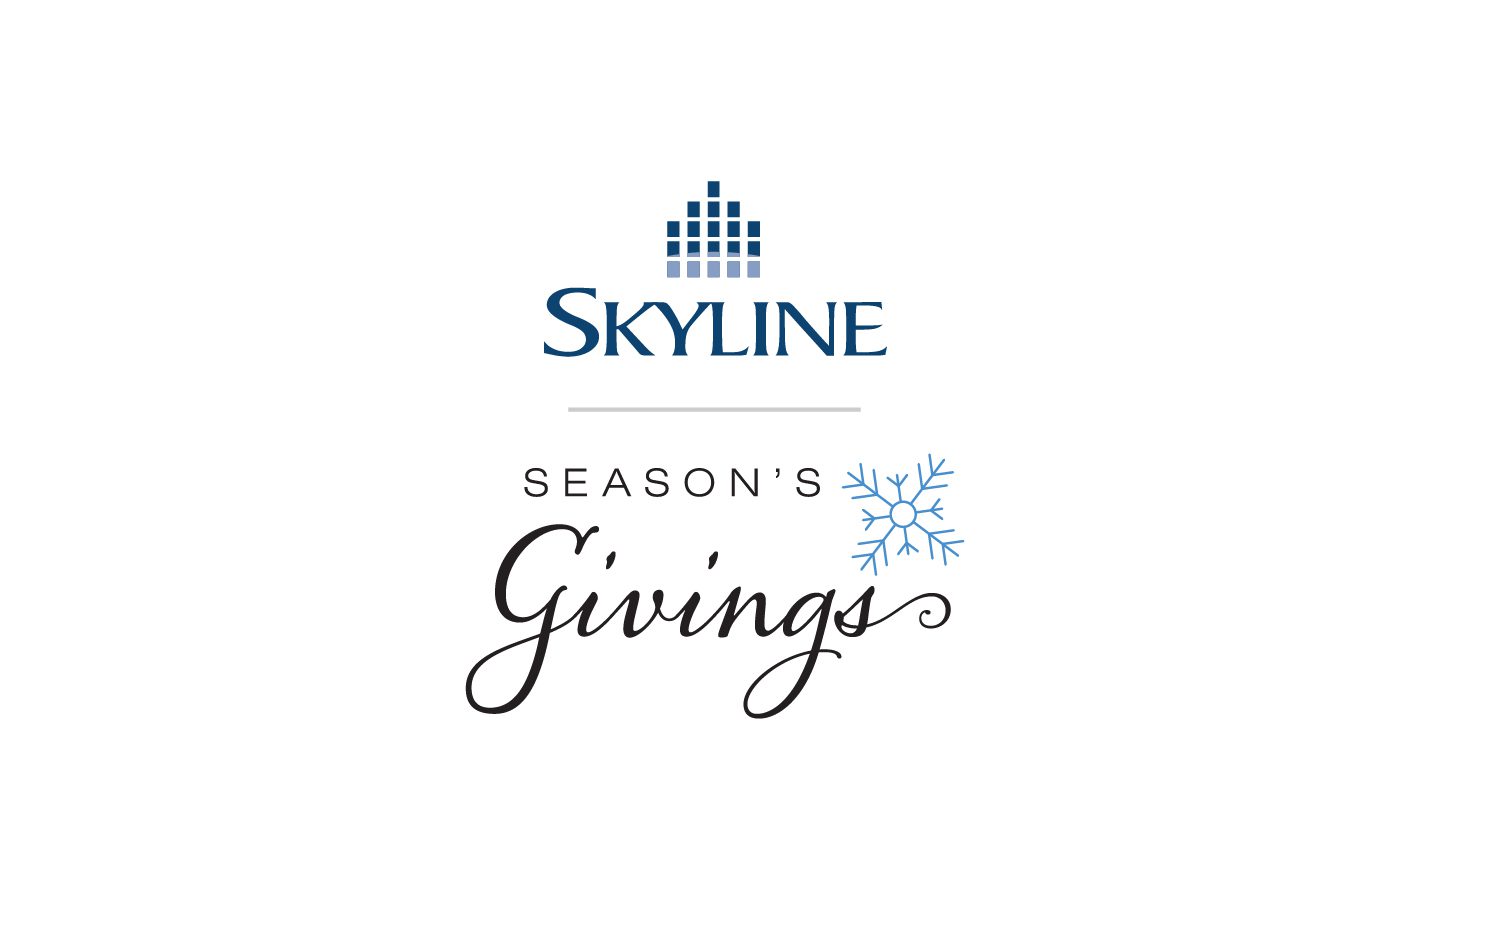 Skyline Launches Holiday Fundraising Campaign to Help Families in Need across Canada